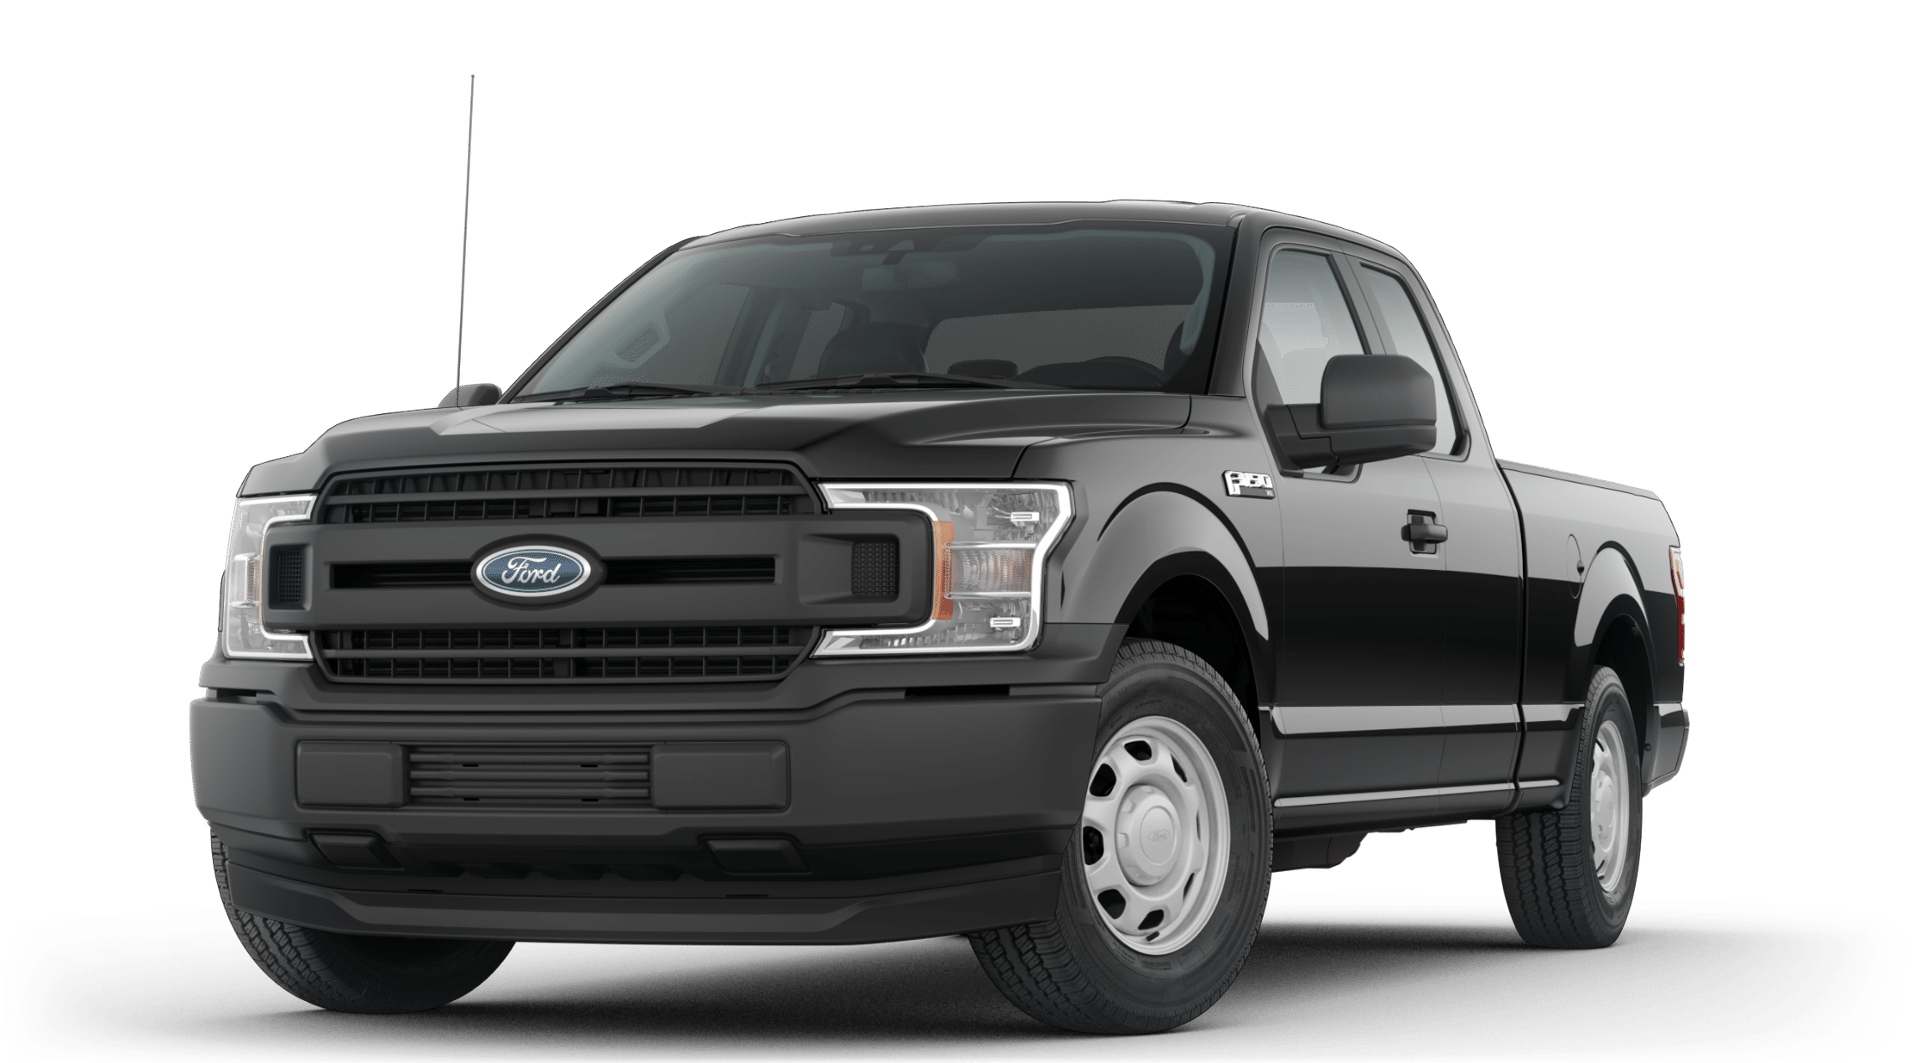 Ford Regular Cab: A Small Cabin with Big Potential